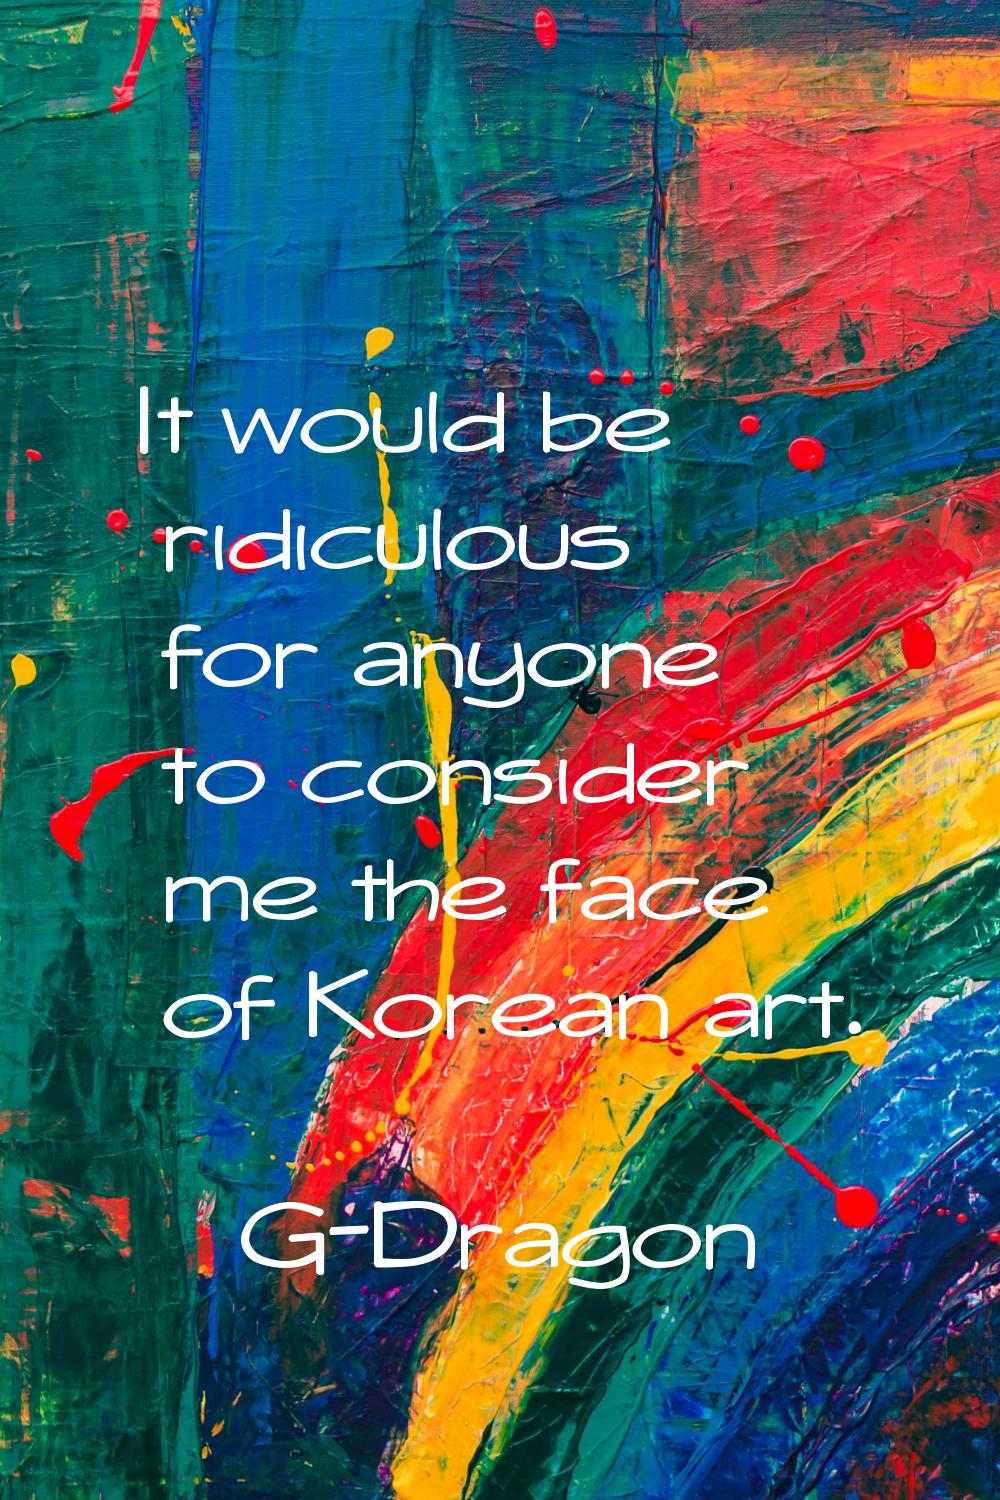 It would be ridiculous for anyone to consider me the face of Korean art.